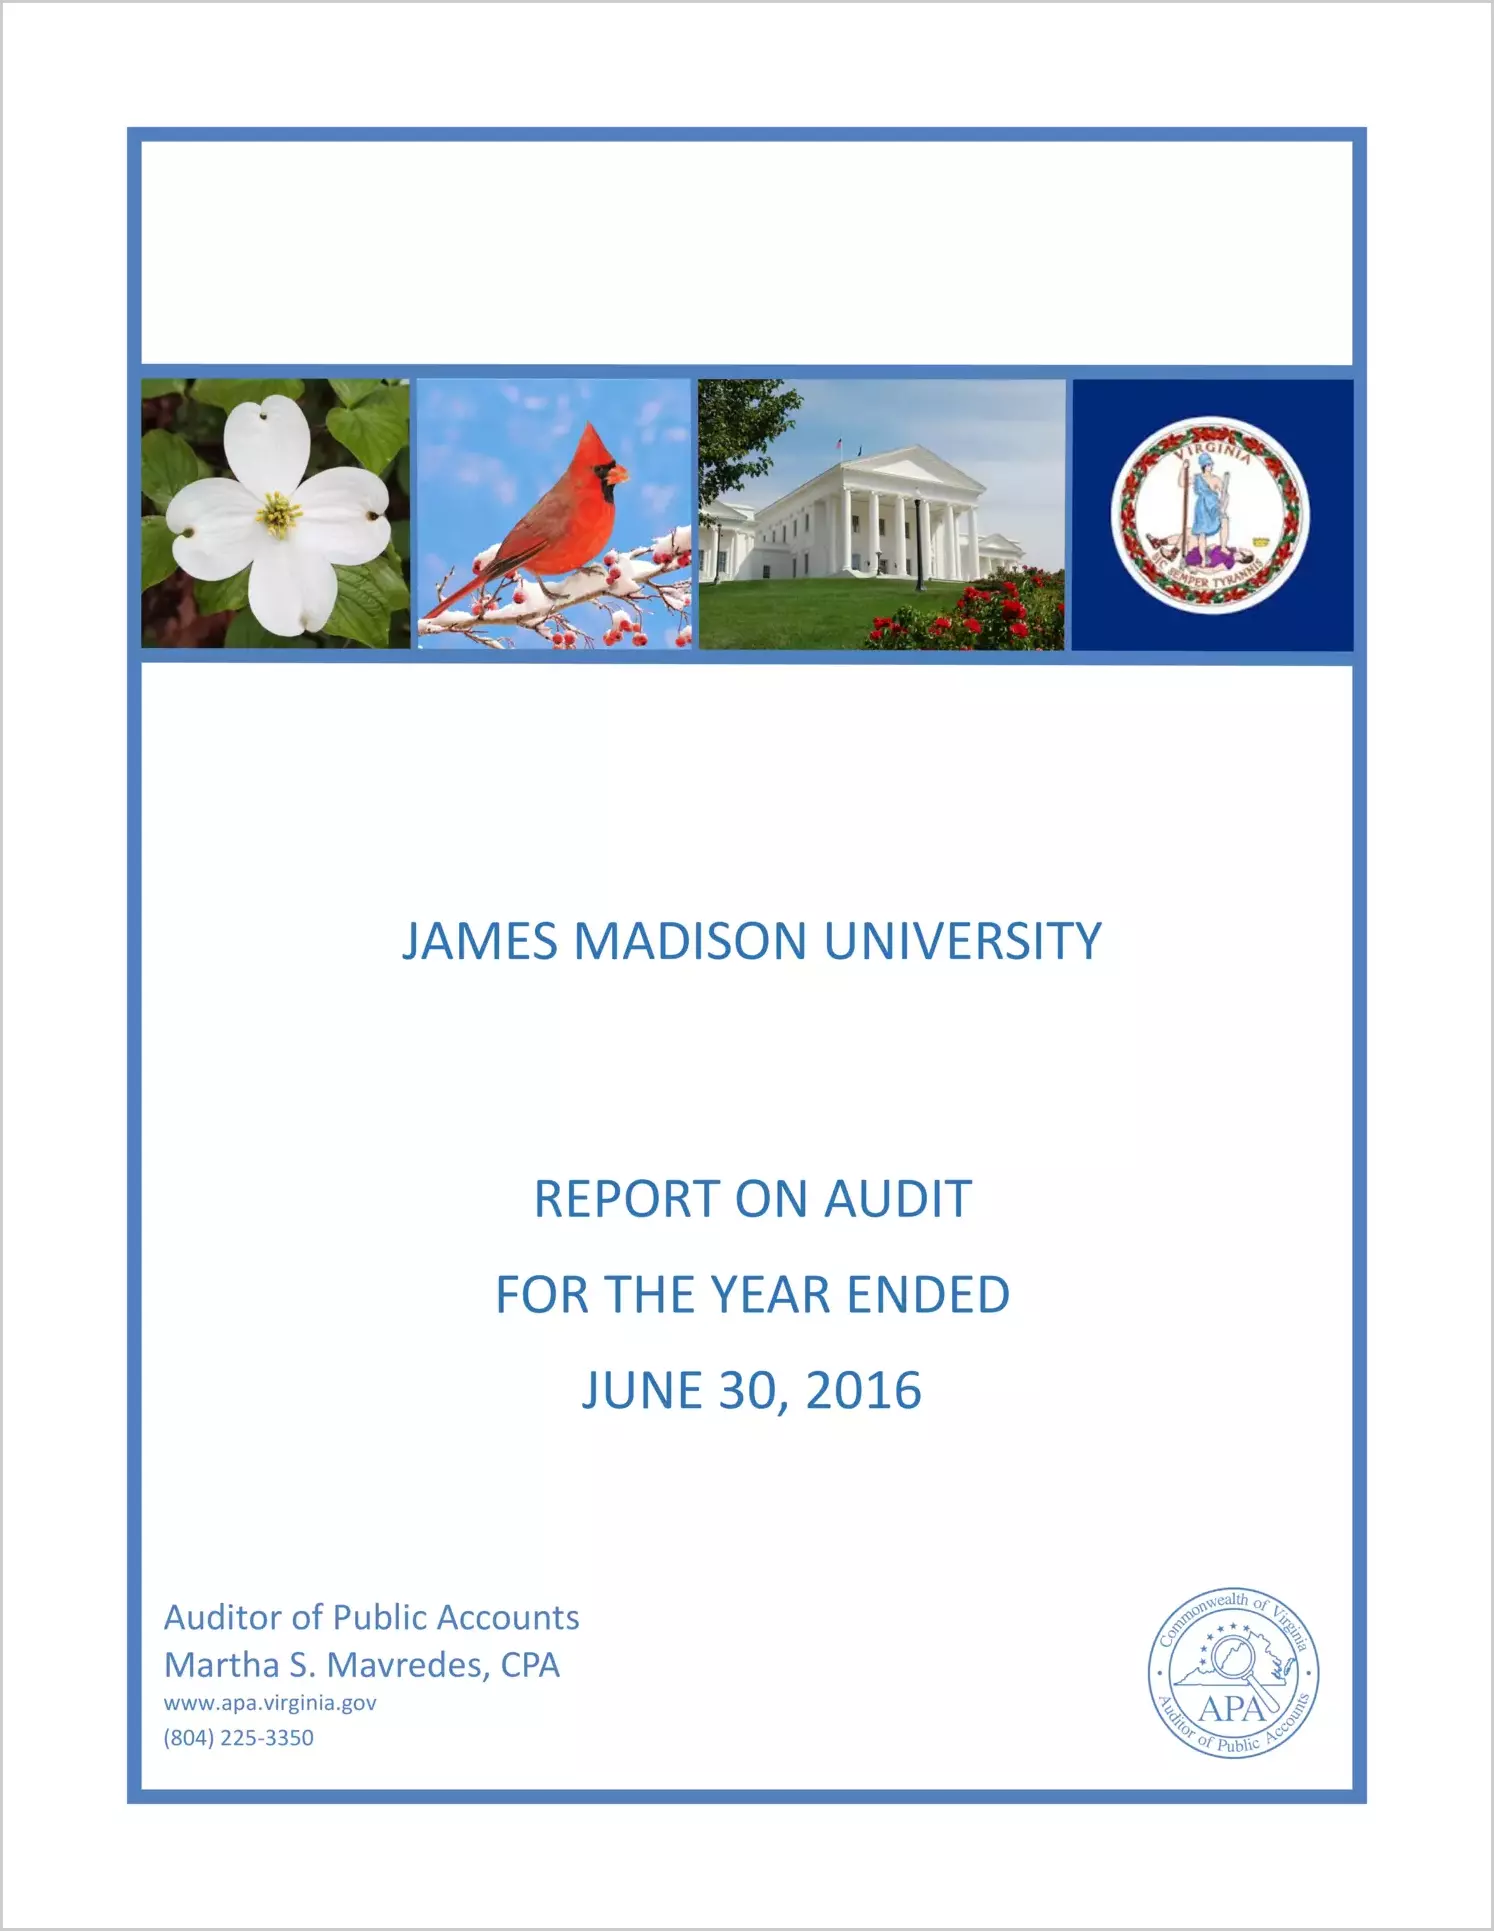 James Madison University for the year ended June 30, 2016